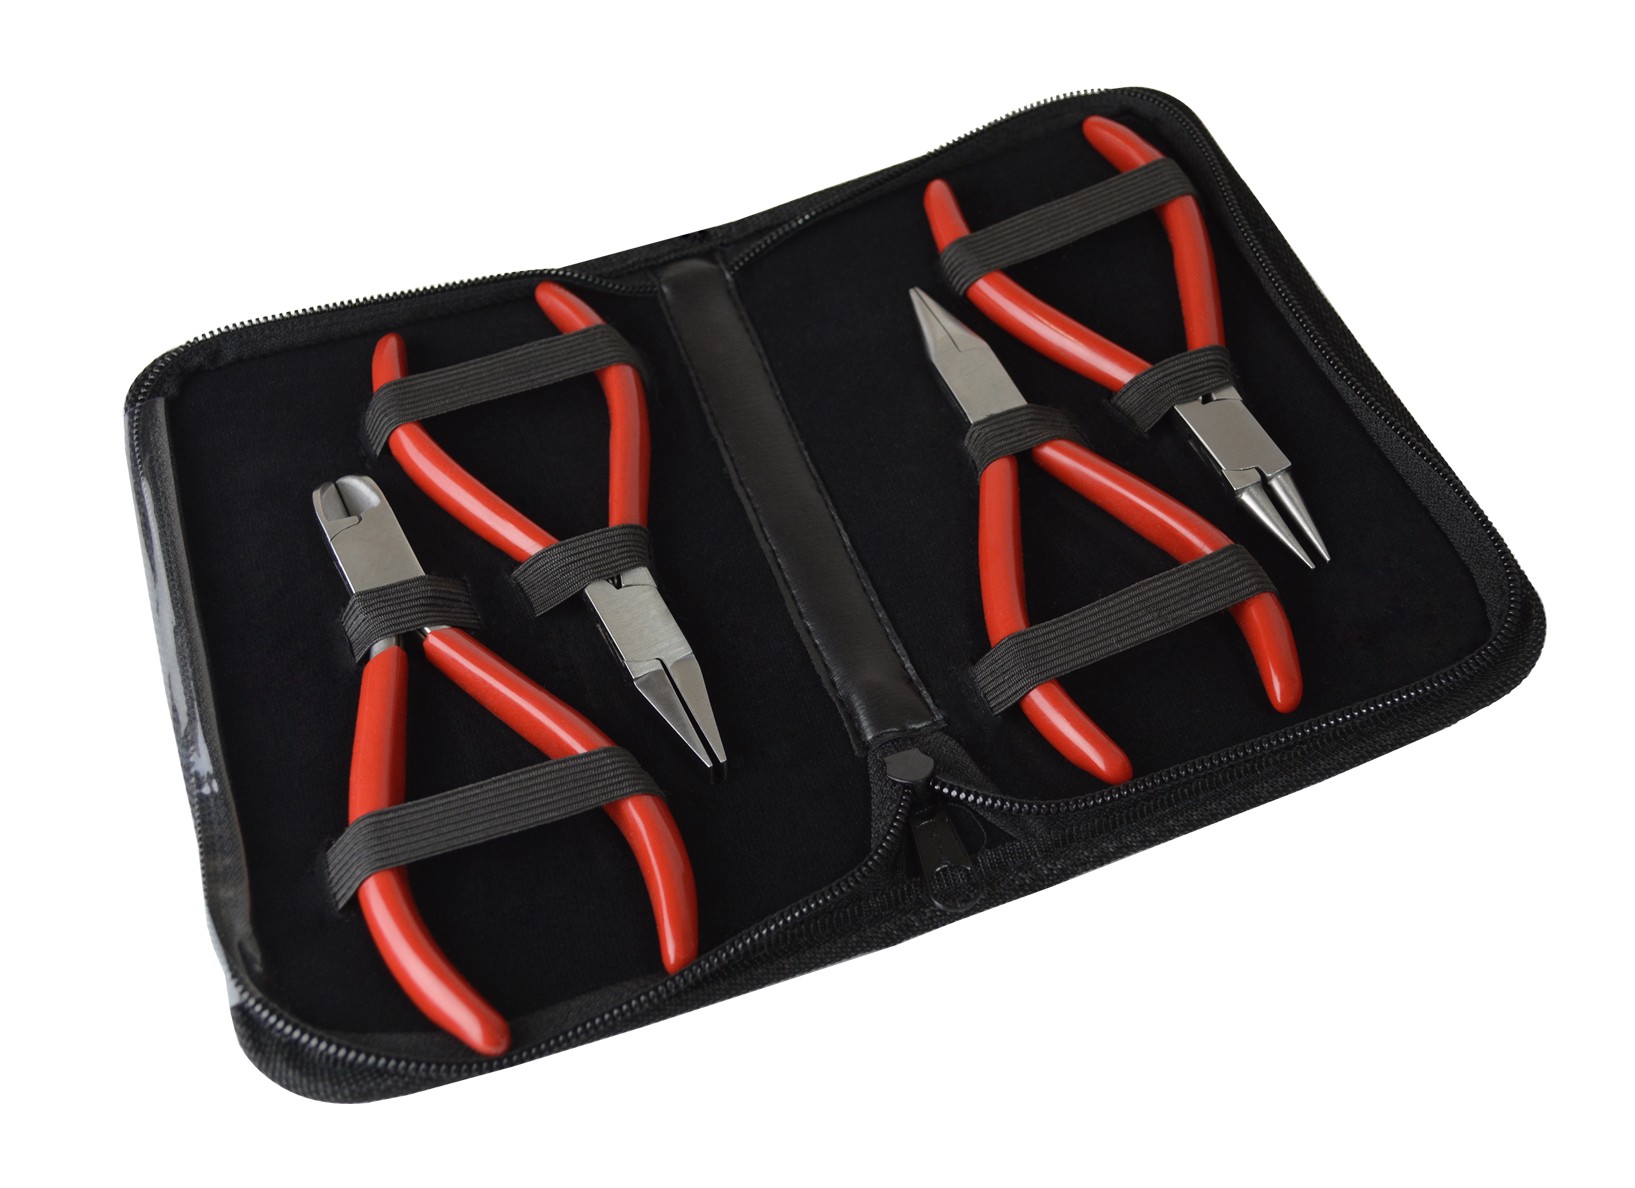 4-Piece 115 MM Plier Kit with Chain, Flat, Round Nose & Side Cutters